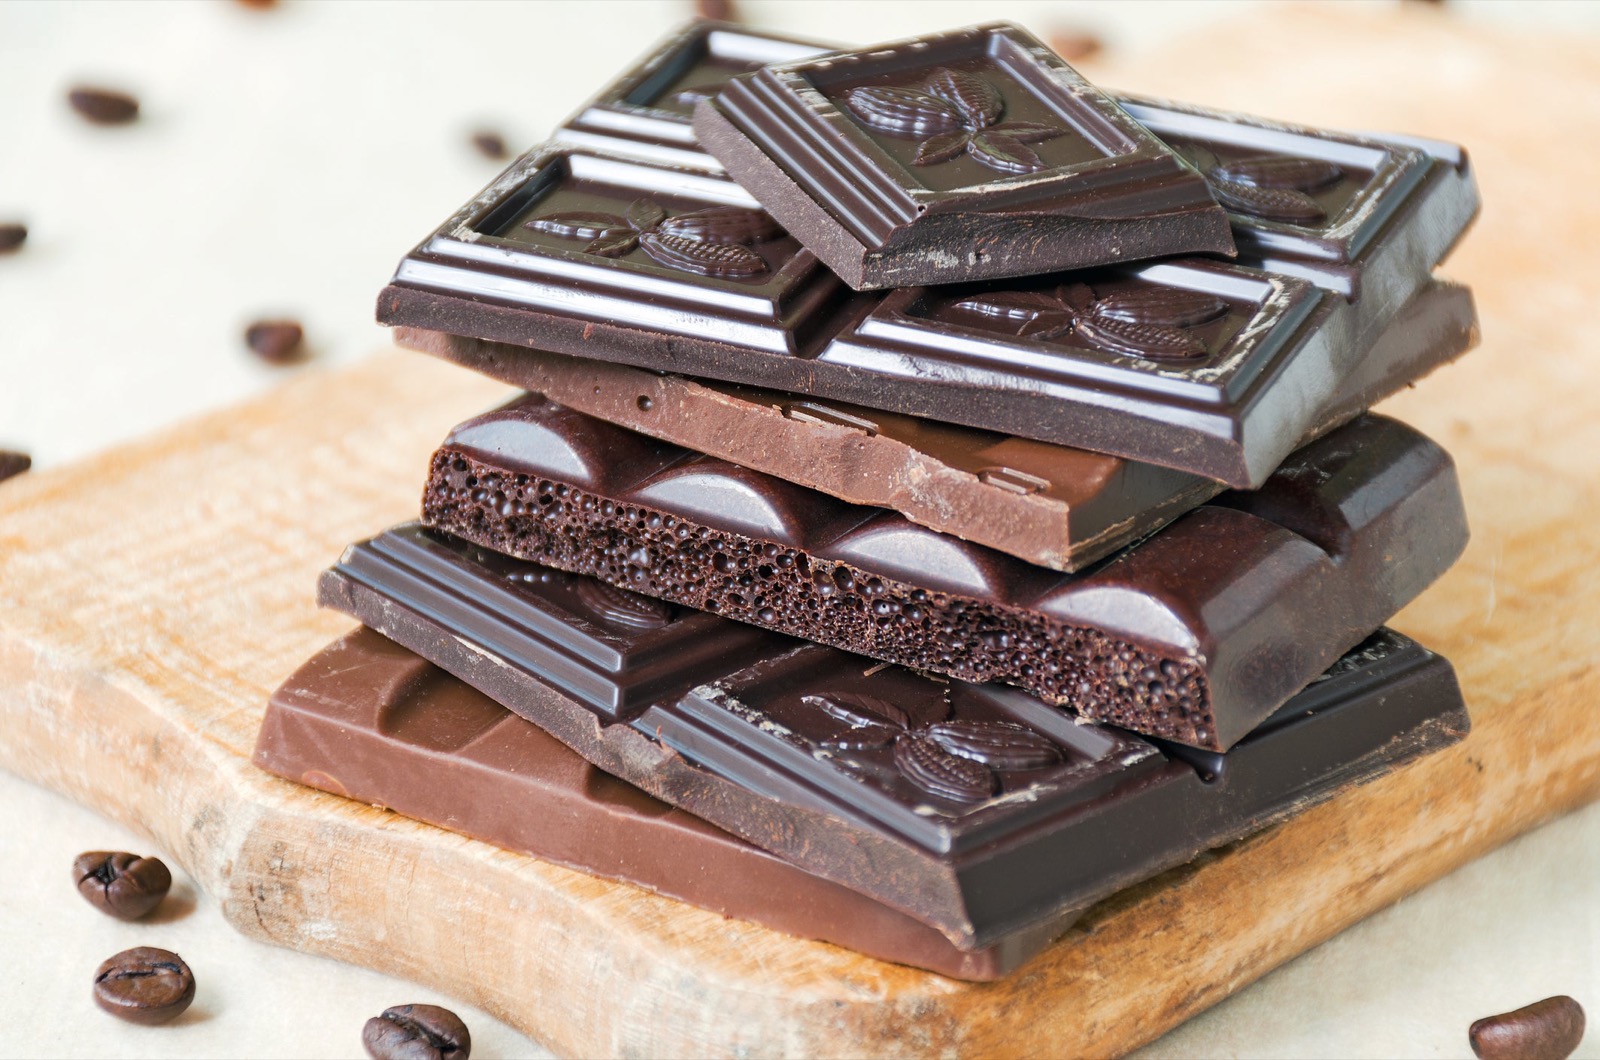 We Know Your Exact Age Based on the Foods You Love and Hate Chocolate Bars